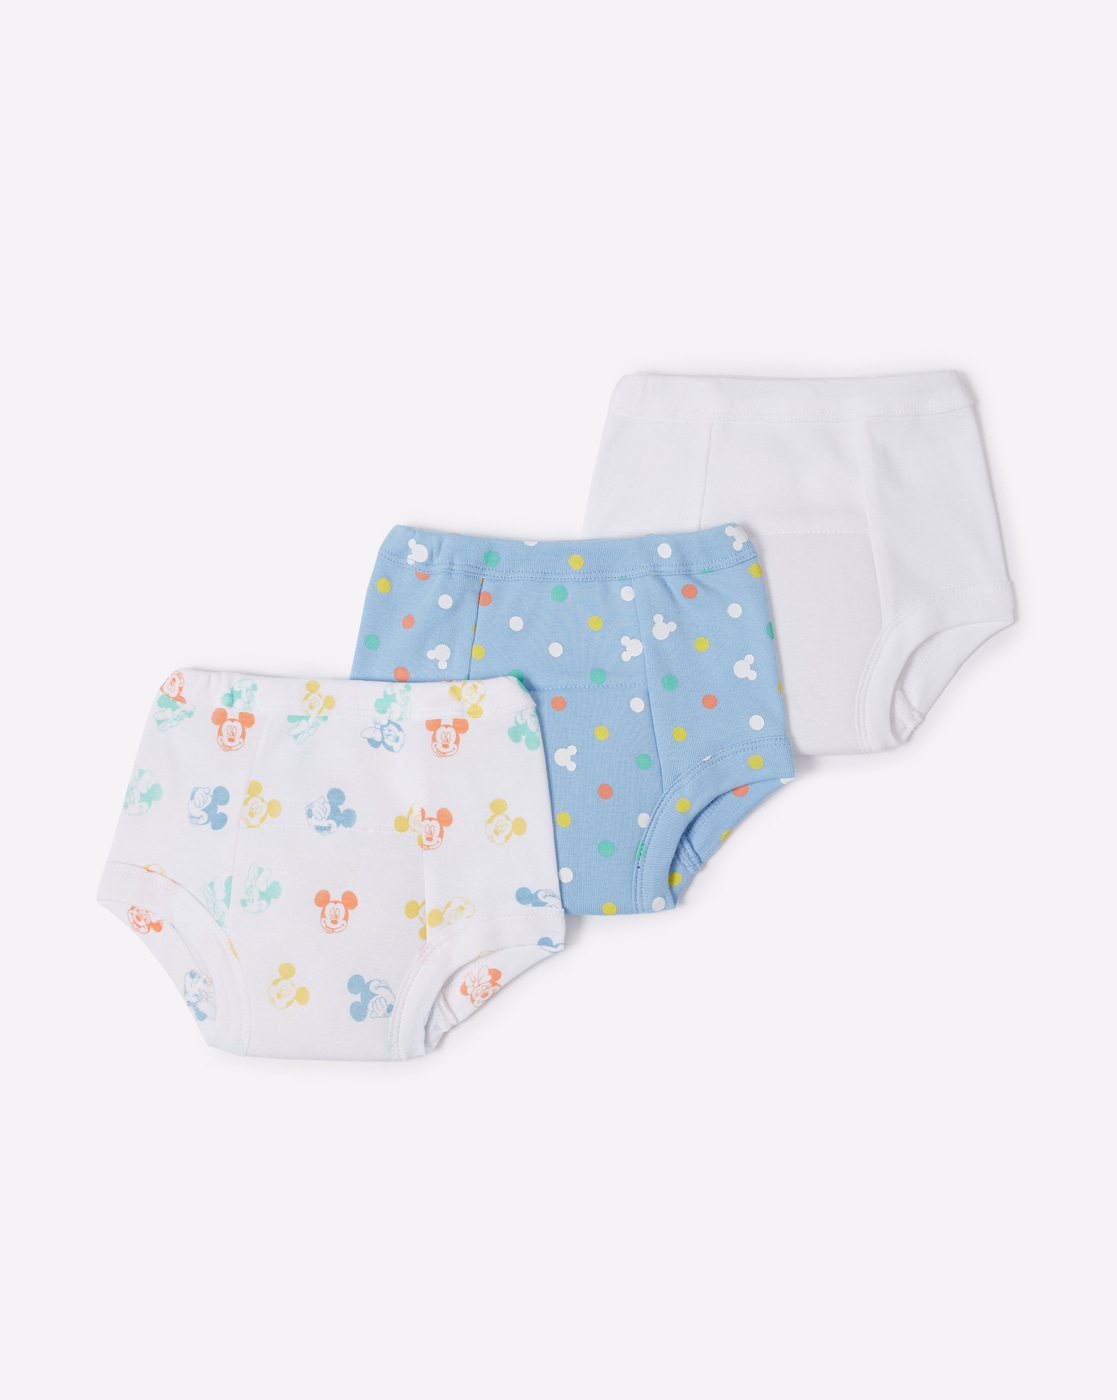 Thirsties training pant - Cloth Nappies Down Under